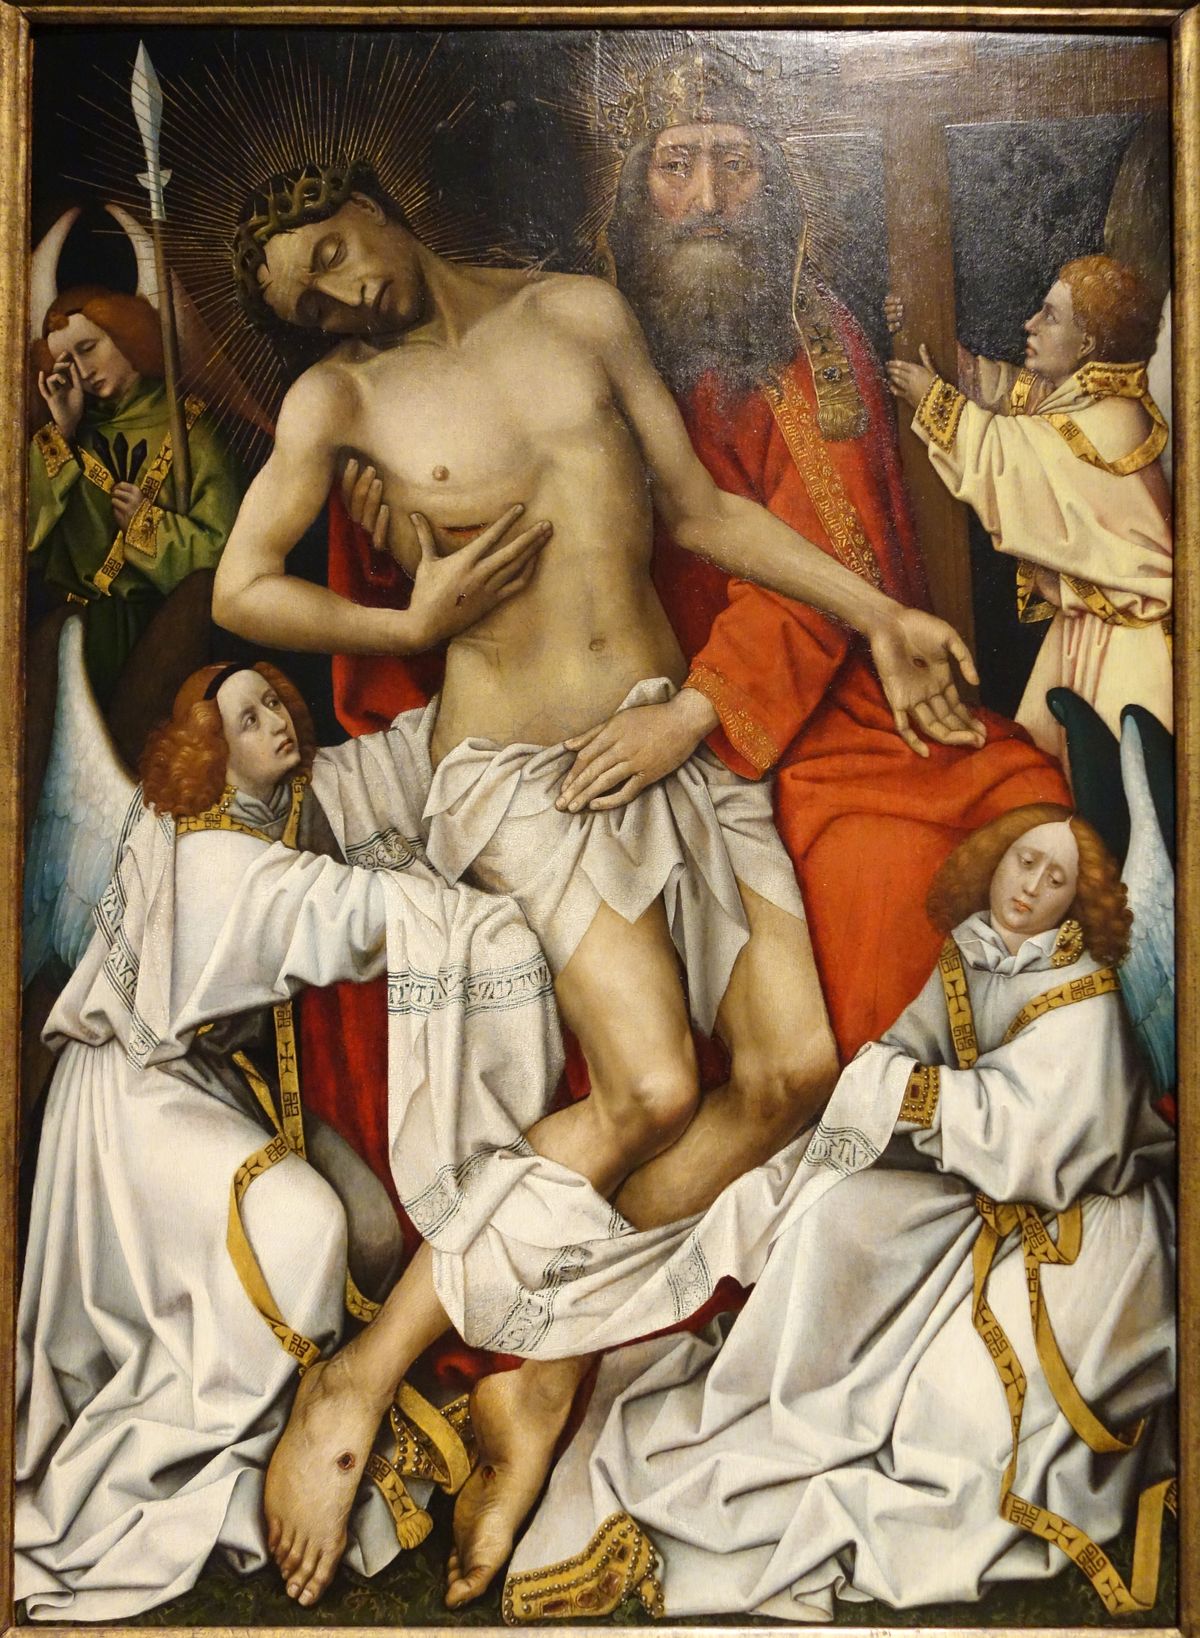 The Holy Trinity (1430-1440) by workshop of Rogier van der Weyden - Public Domain Catholic Painting